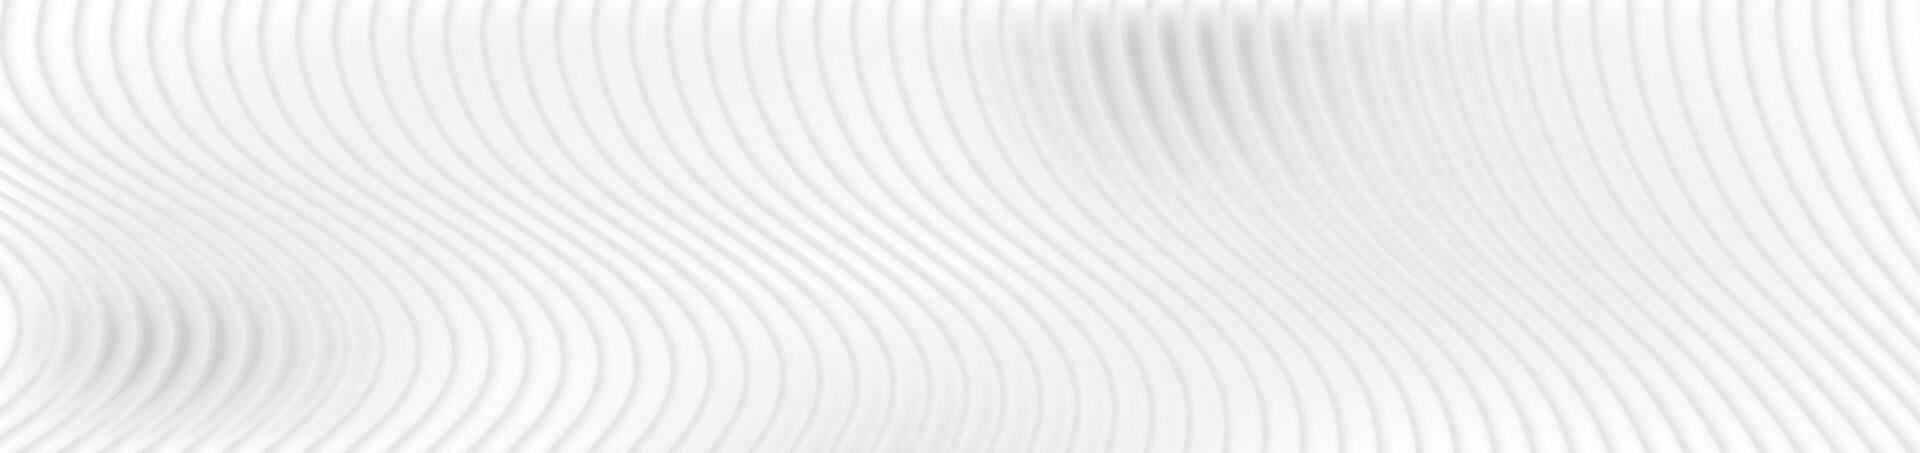 Abstract white waves and lines web header banner vector